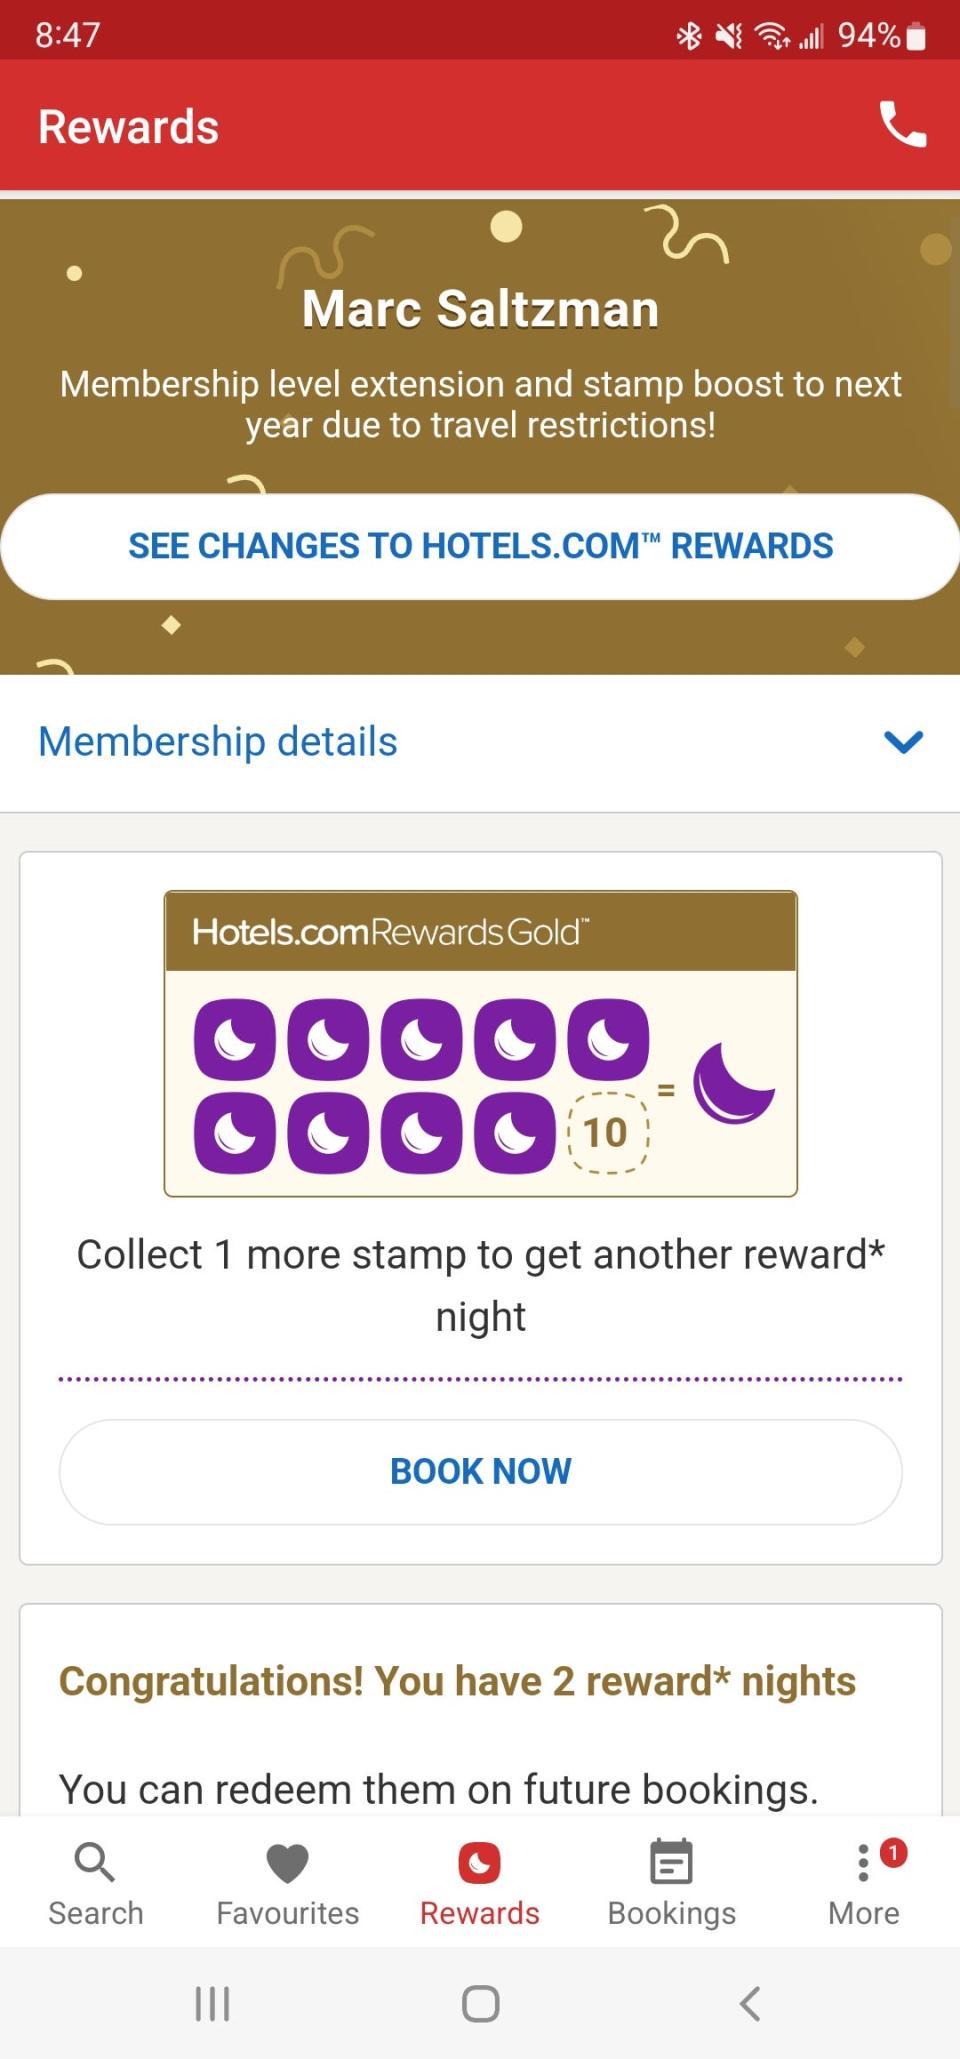 Offering one of the most aggressive rewards programs, Hotels.com has a ‘stay 10 nights and get the next one free’ offer, along with ‘secret prices’ for members.